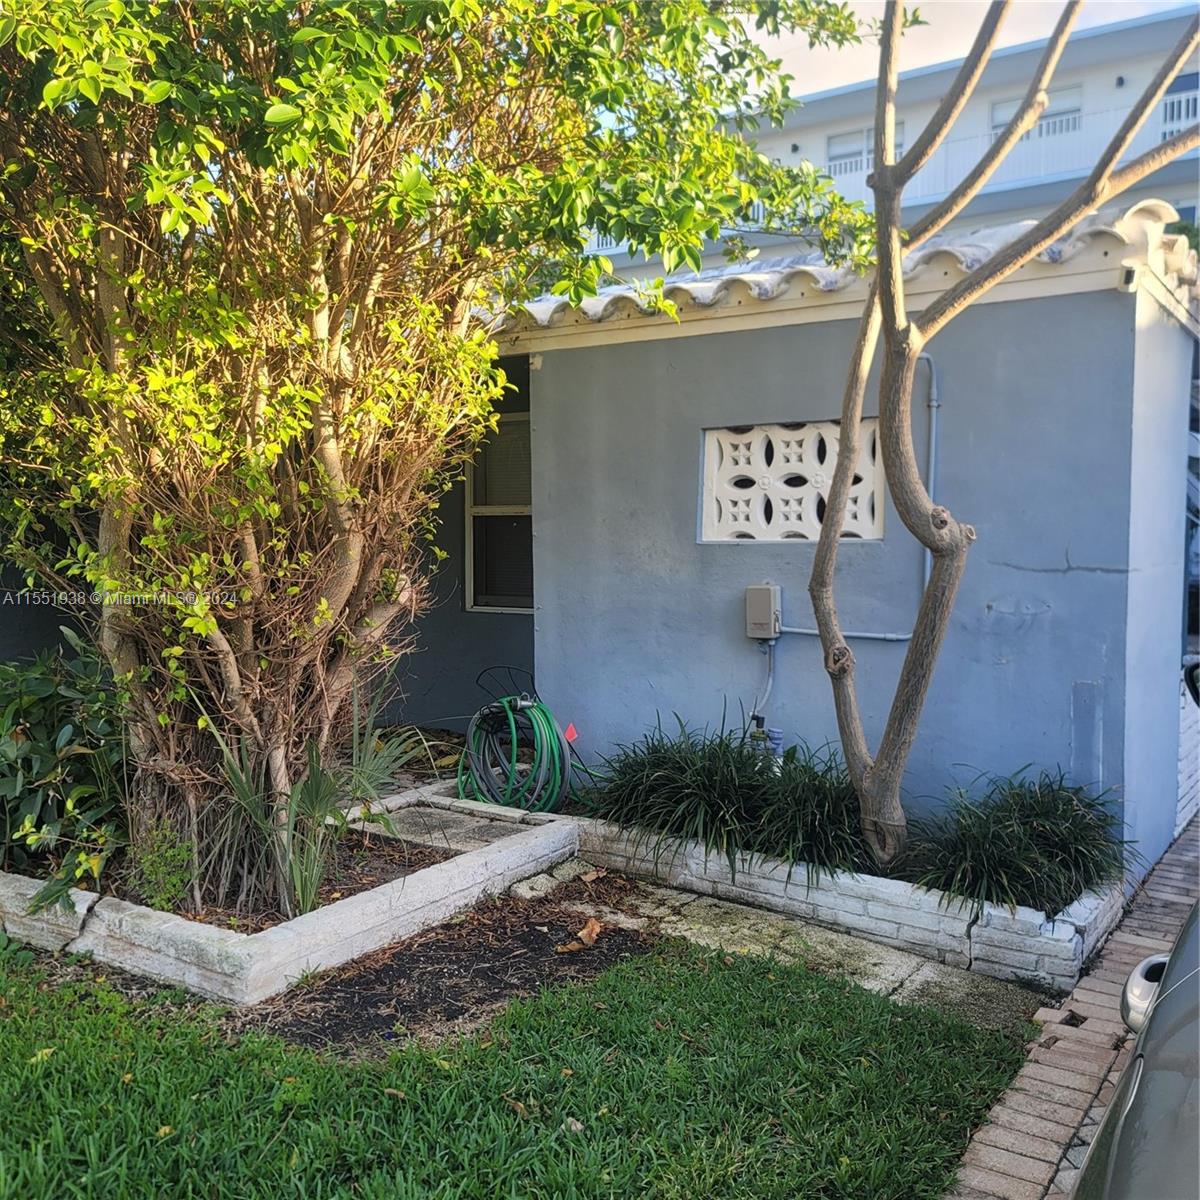 3208 NE 8th Ct 1-2, Pompano Beach, Florida 33062, 1 Bedroom Bedrooms, ,1 BathroomBathrooms,Residentiallease,For Rent,3208 NE 8th Ct 1-2,A11551938